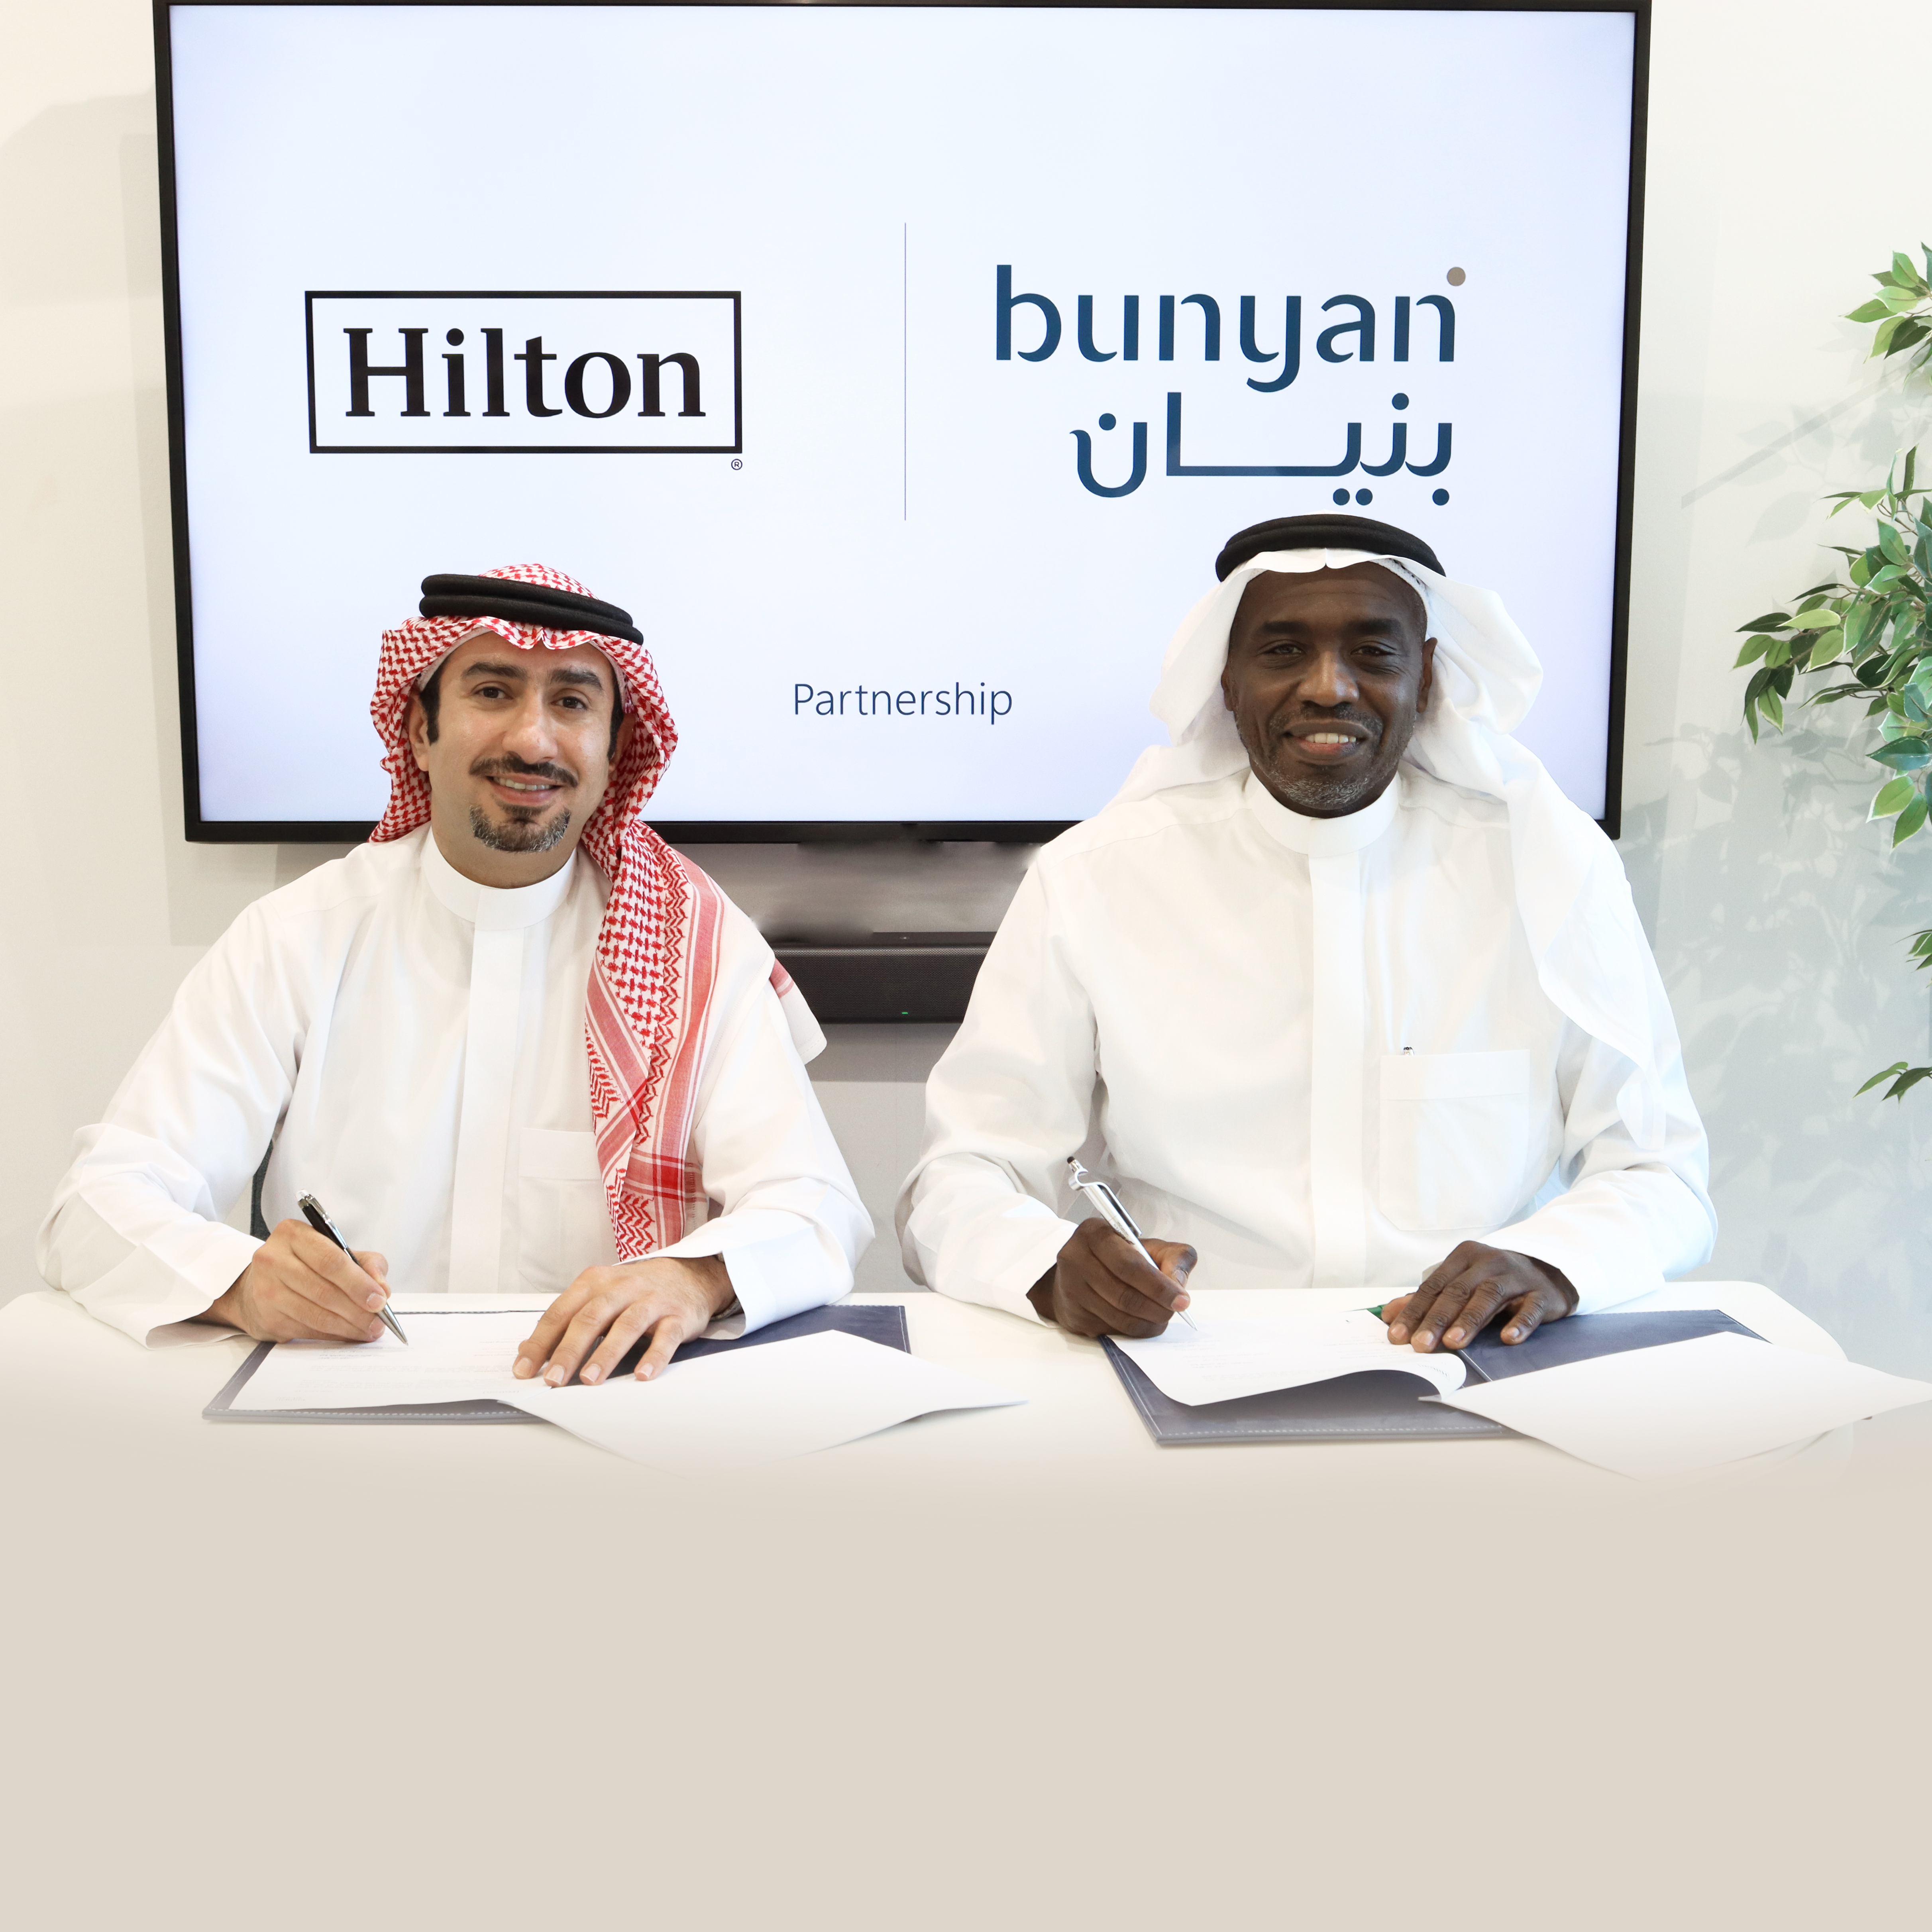 Hilton to train Saudi youth amidst push to develop local hospitality talent